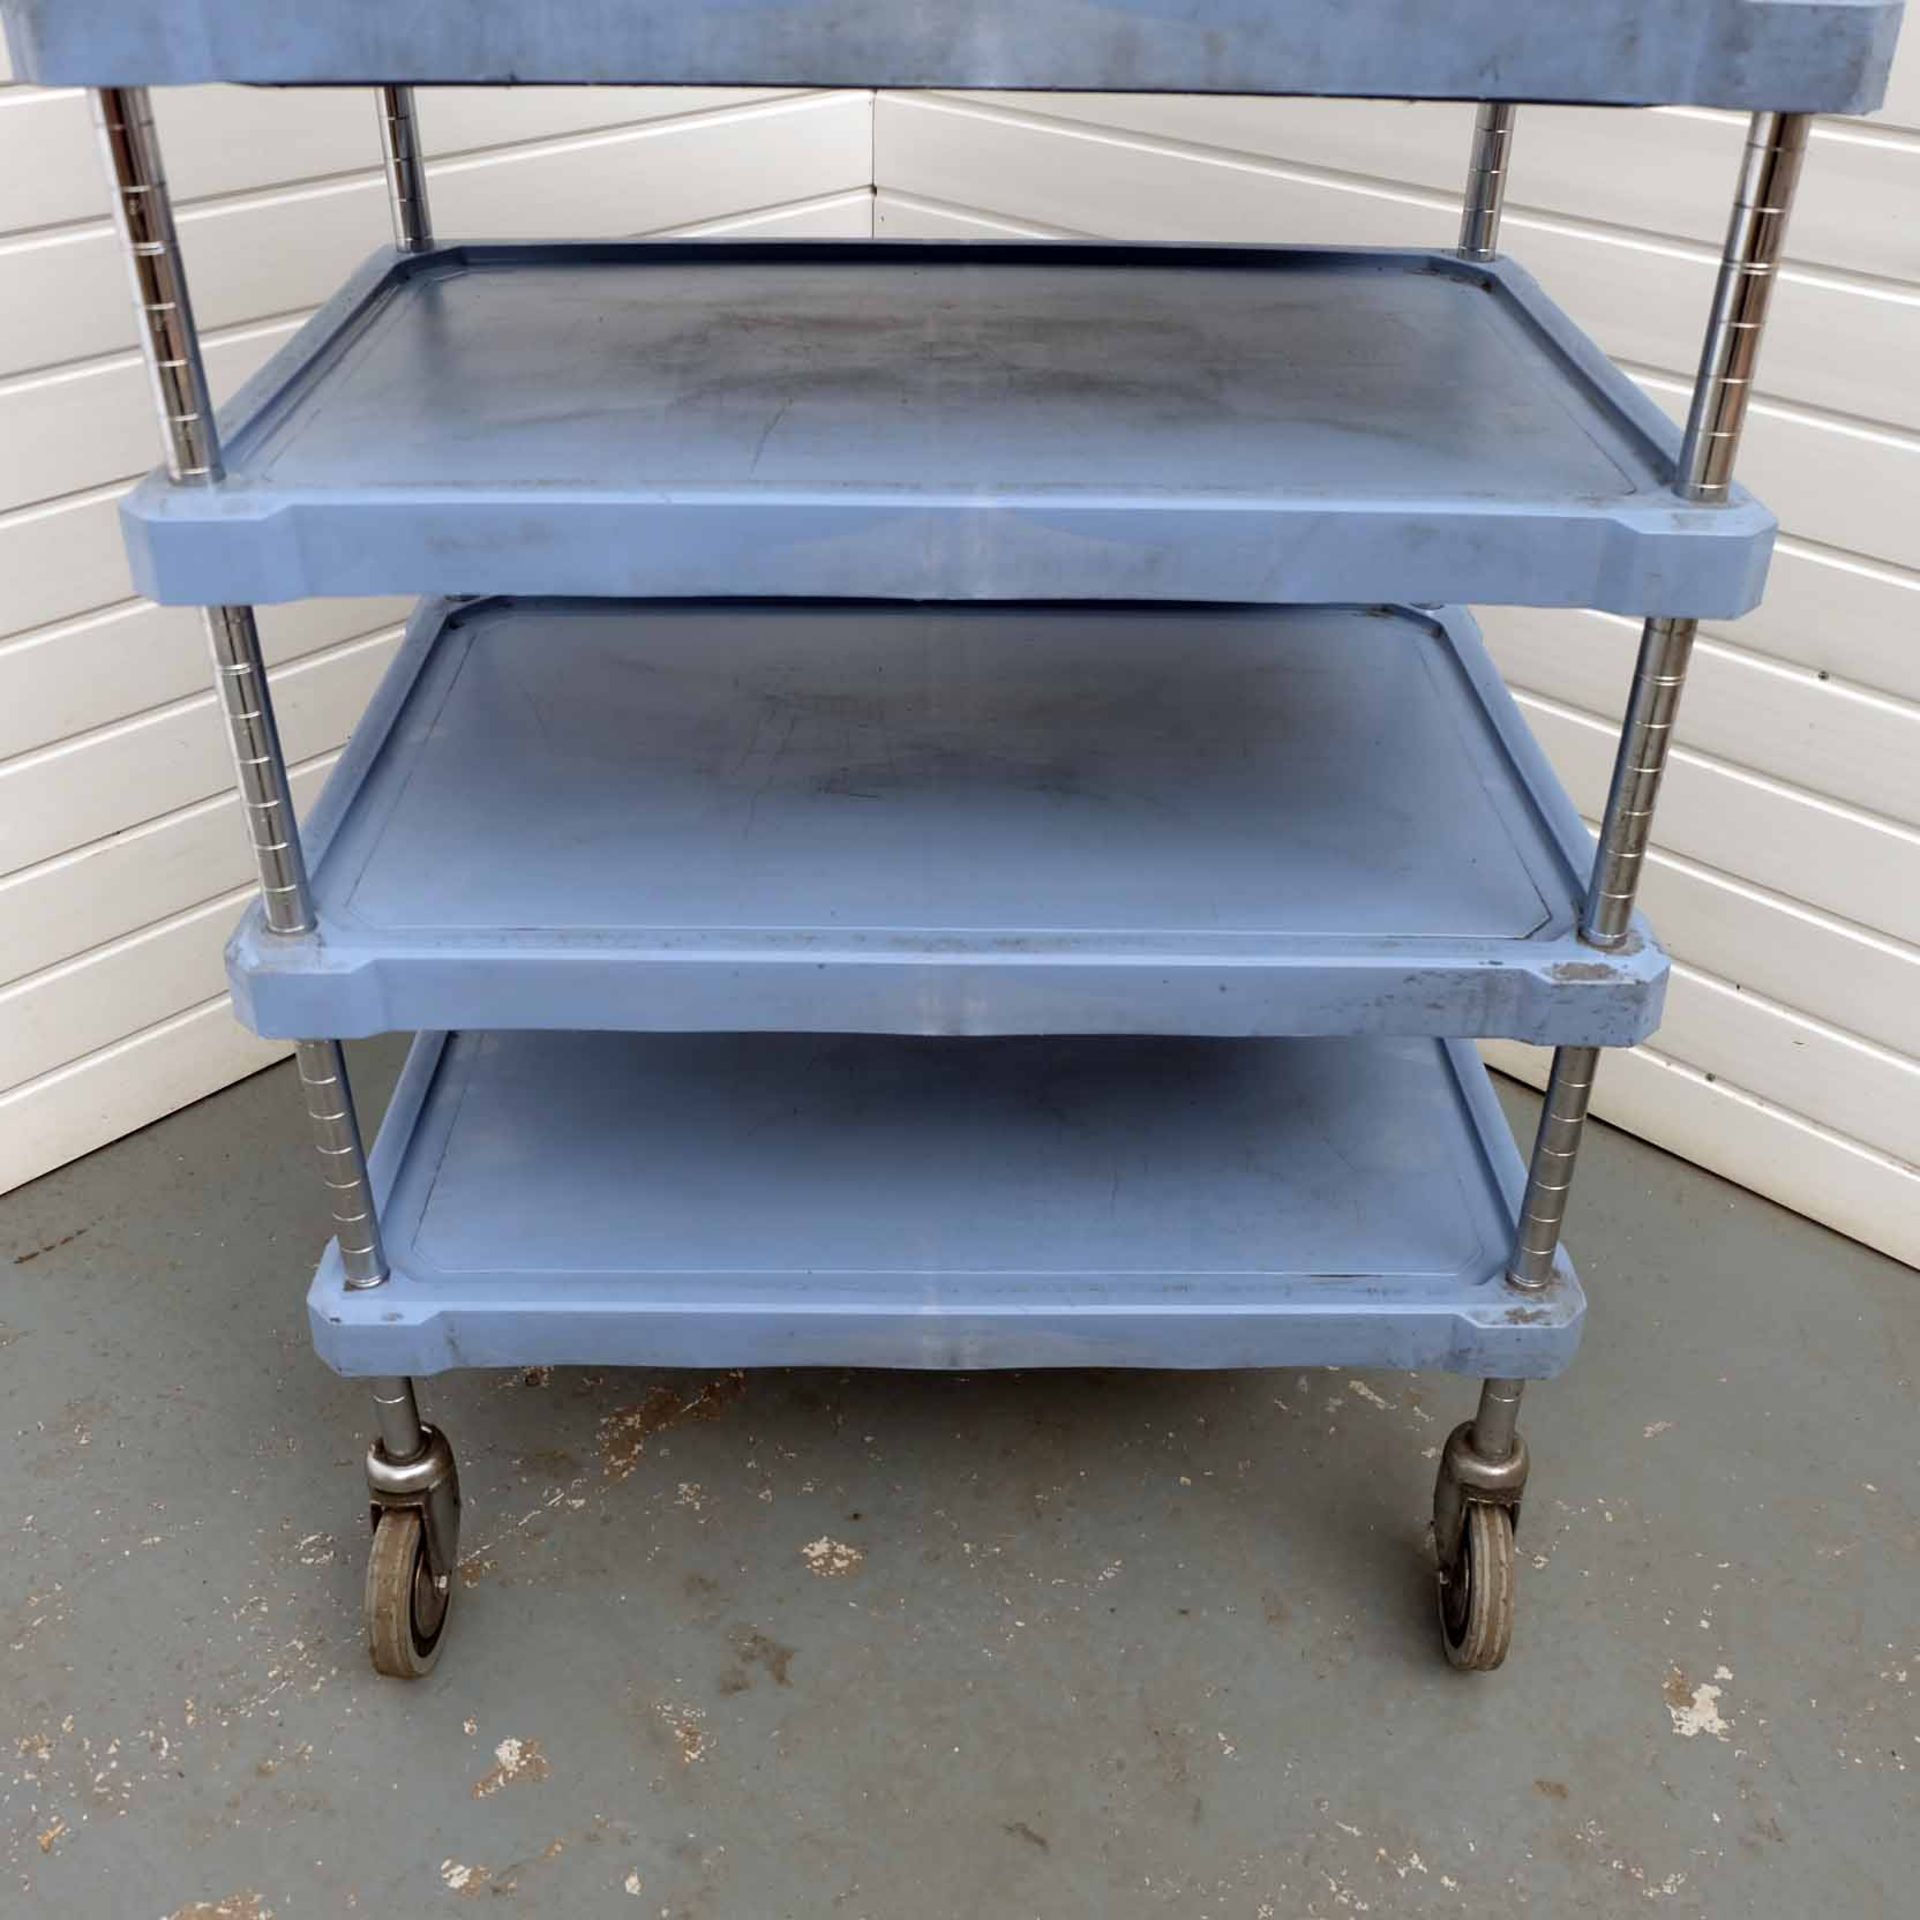 Parts Trolley With 5 Shelves. Size 795mm x 540mm x 1525mm High. - Image 5 of 5